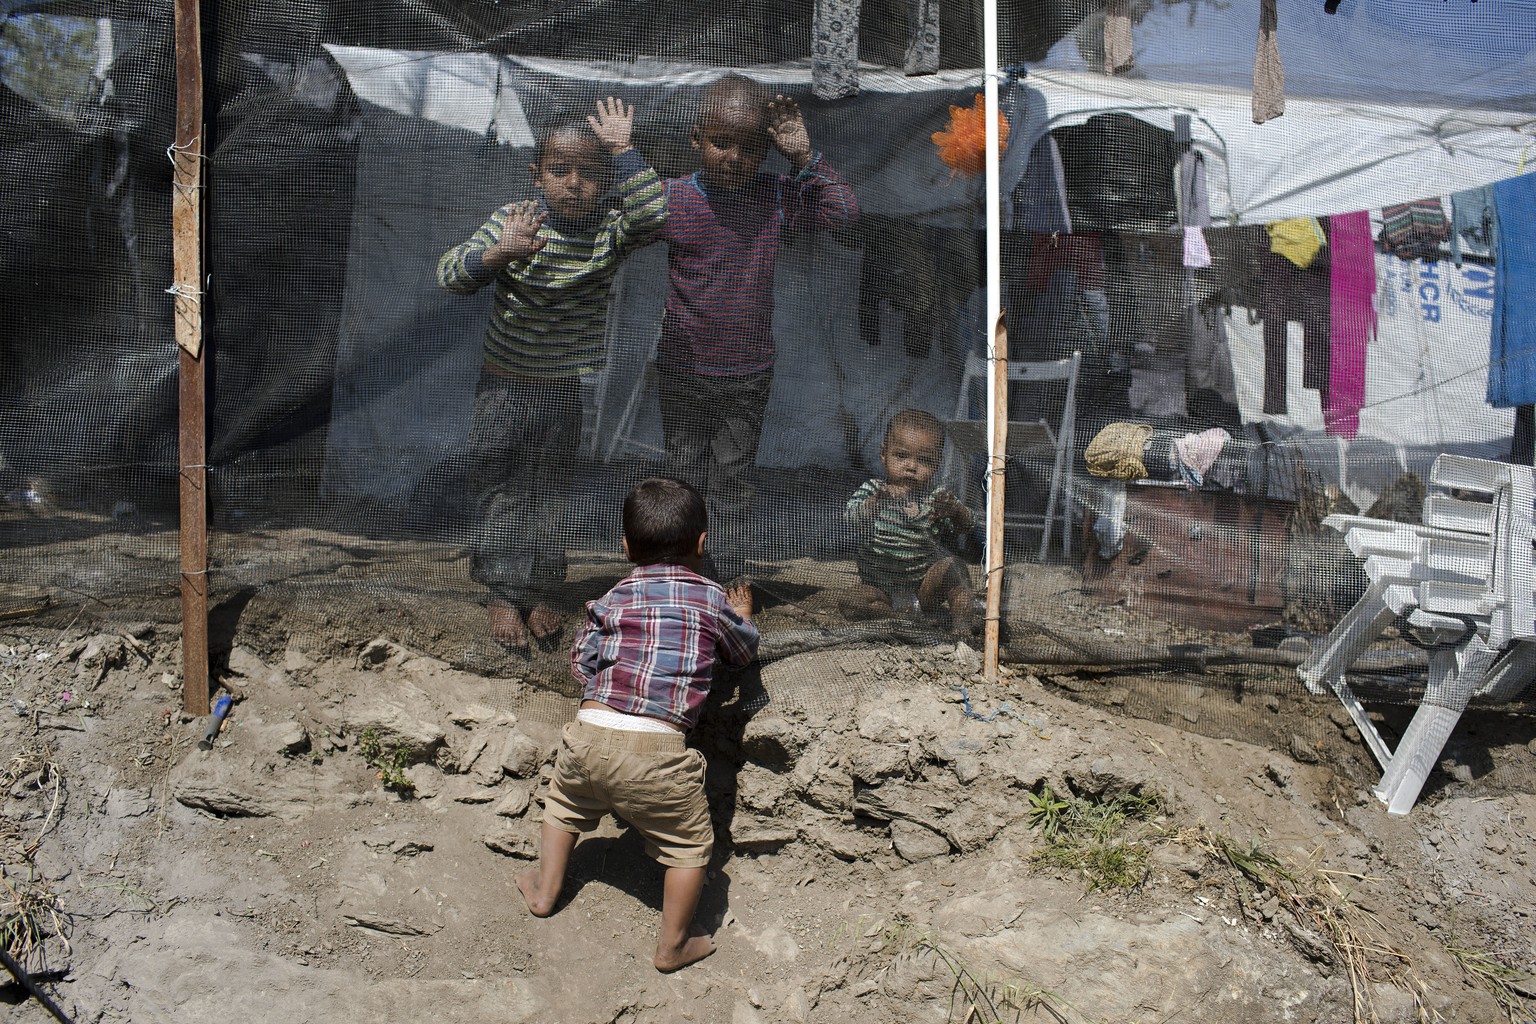 Children play inside the Moria refugee camp on the northeastern Aegean island of Lesbos, Greece, Wednesday, May 2, 2018. Amid protests, the government has promised to drastically reduce overcrowding a ...